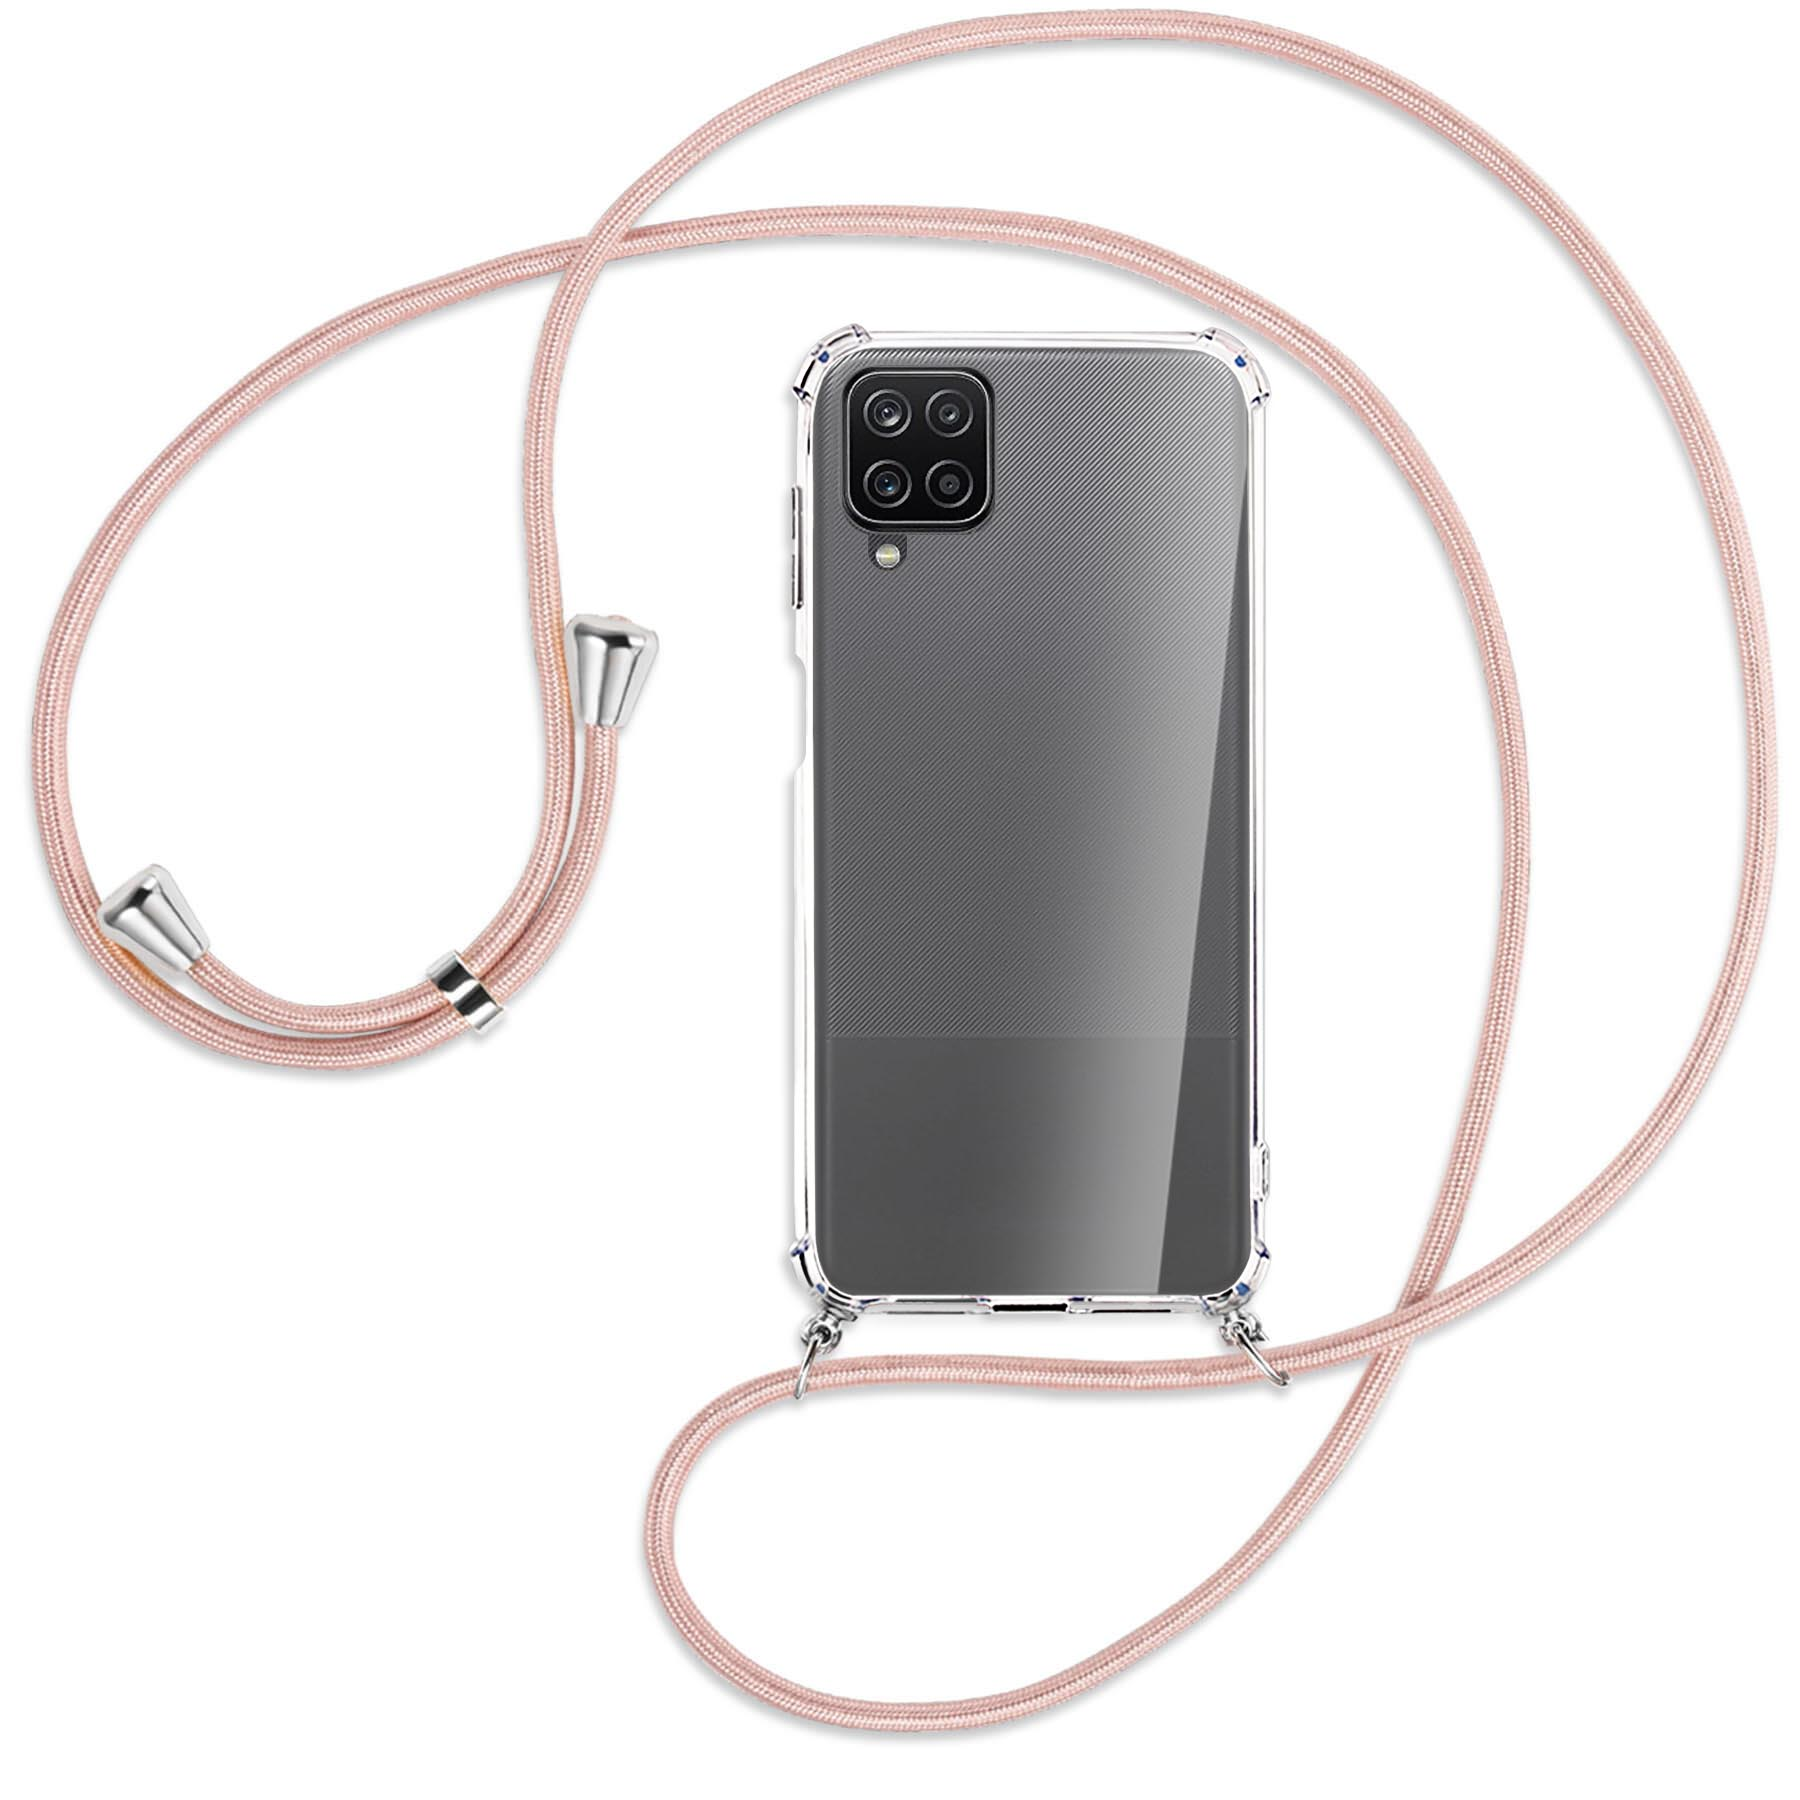 MTB Silber ENERGY M15, Samsung, MORE Rosegold Galaxy A12, Galaxy / Kordel, Umhänge-Hülle mit Backcover,